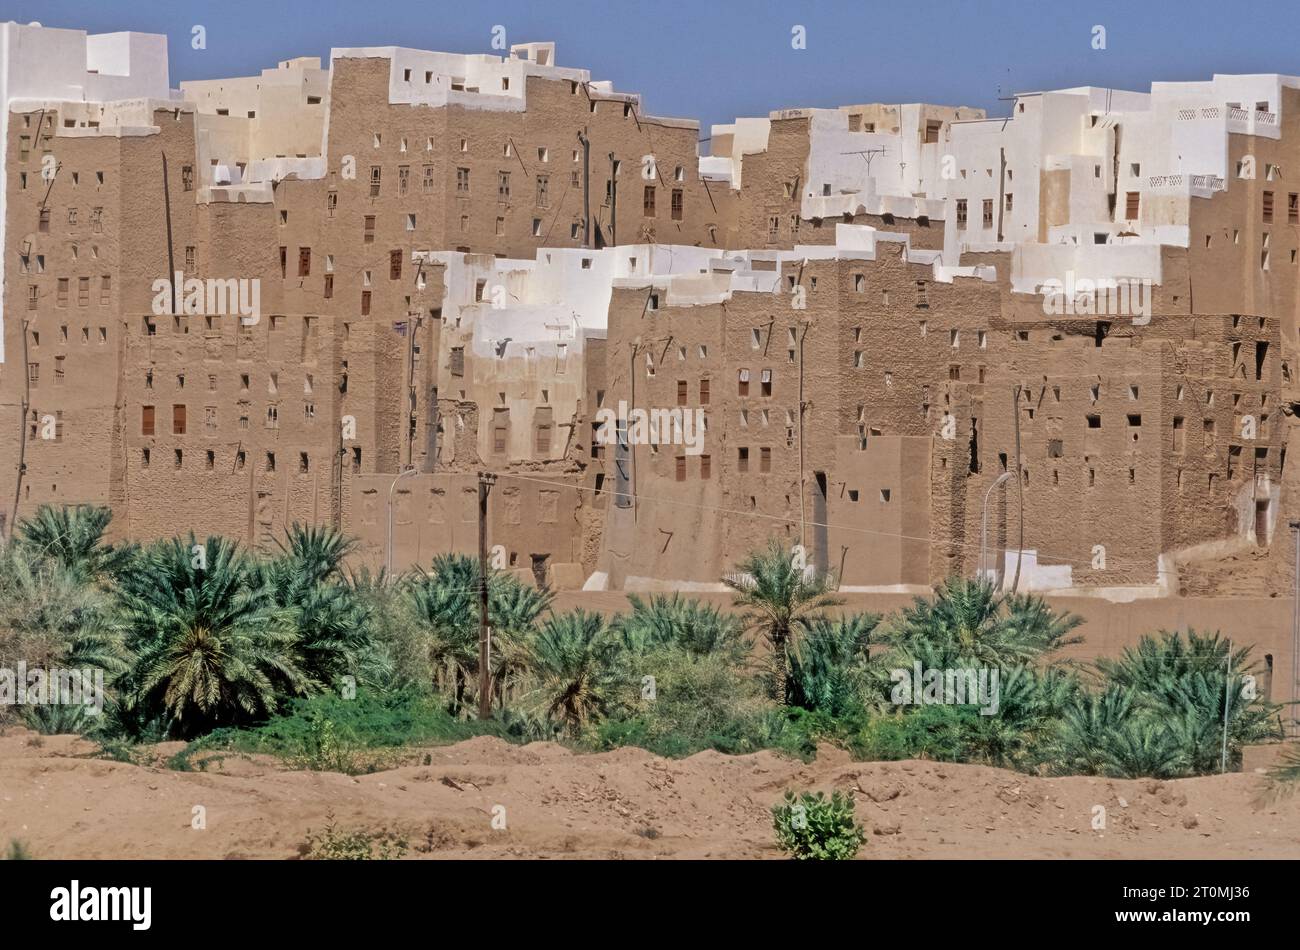 Shibam Hadramawt is a town in Yemen. With about 7,000 inhabitants, it is the seat of the District of Shibam in the Governorate of Hadhramaut. Stock Photo